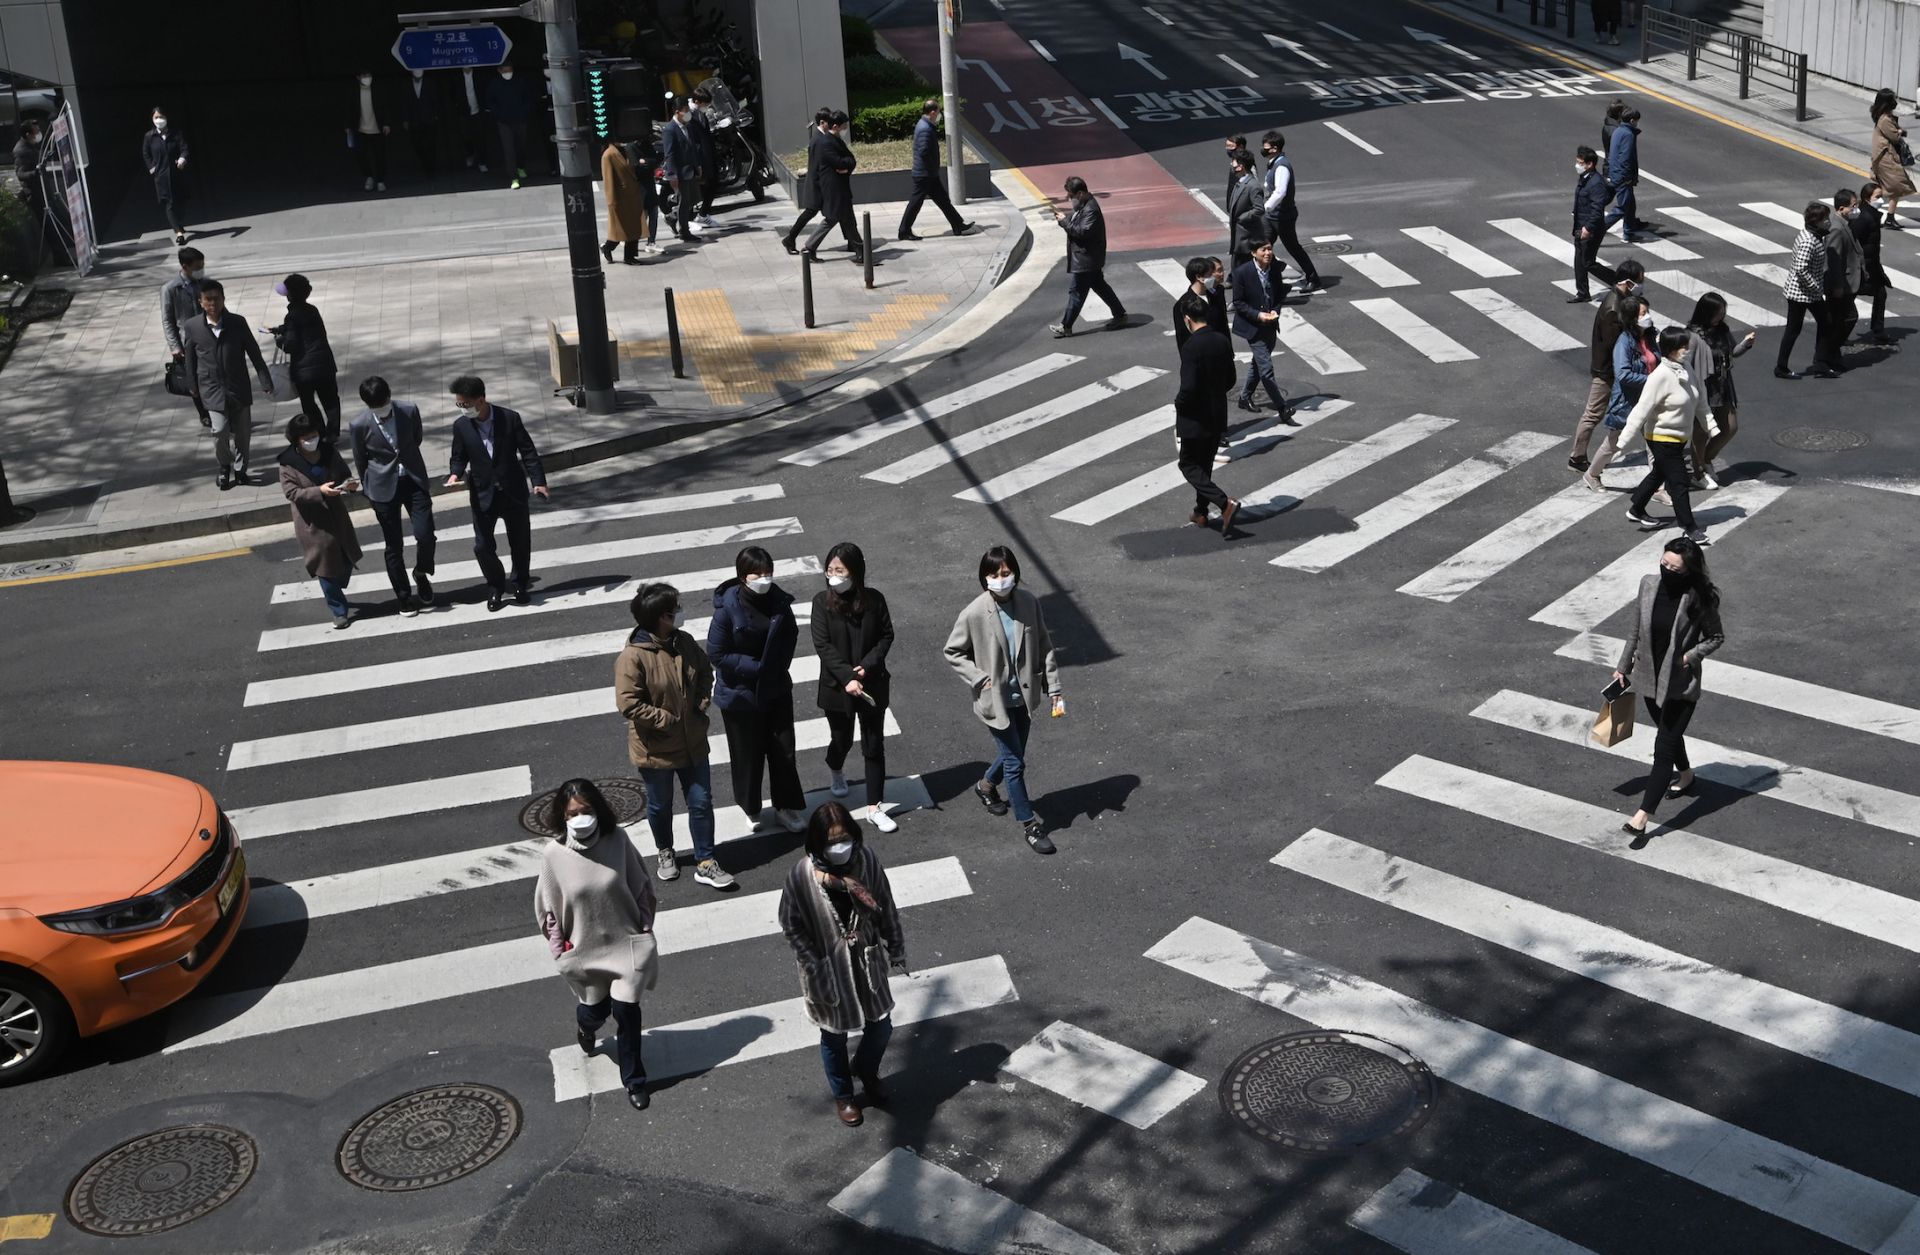 Pedestrians wearing face masks cross an intersection in Seoul, South Korea, on April 23, 2020. In the first quarter of 2020, South Korea's economy saw its worst performance in more than a decade as COVID-19 spread across the country. 